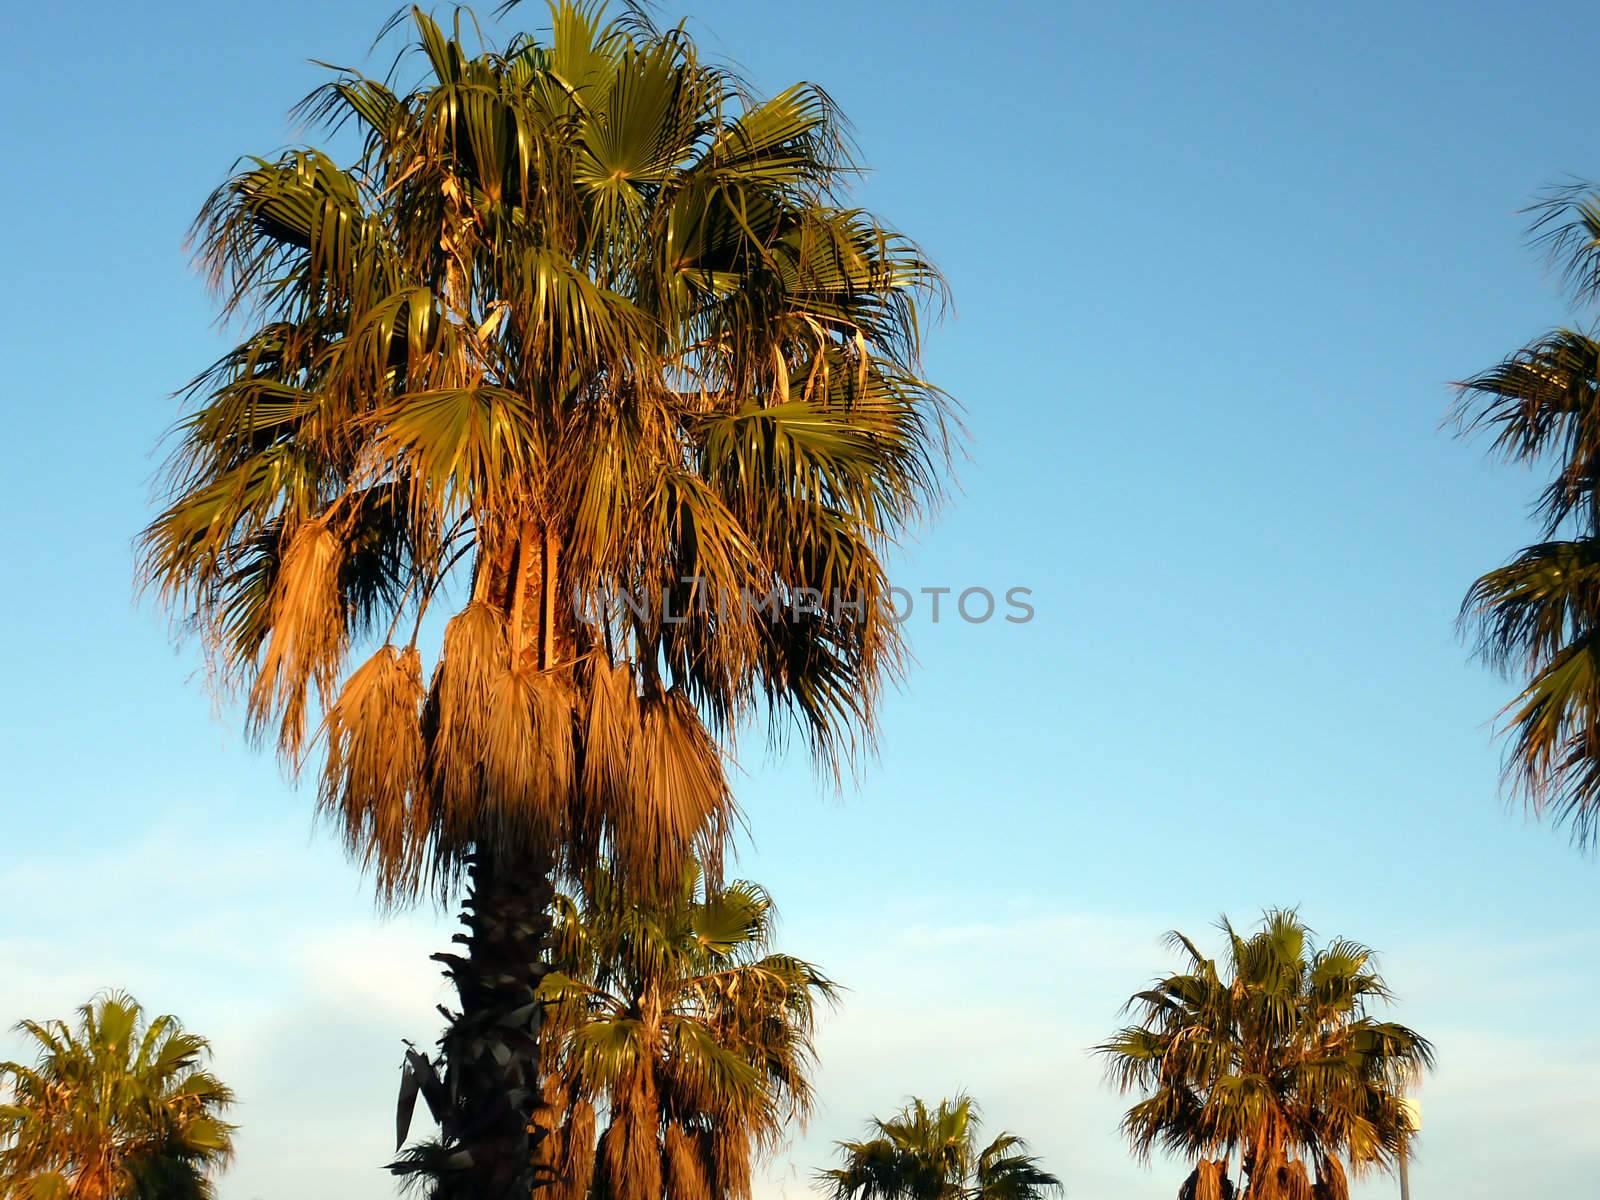 Palm trees by sunset by Elenaphotos21